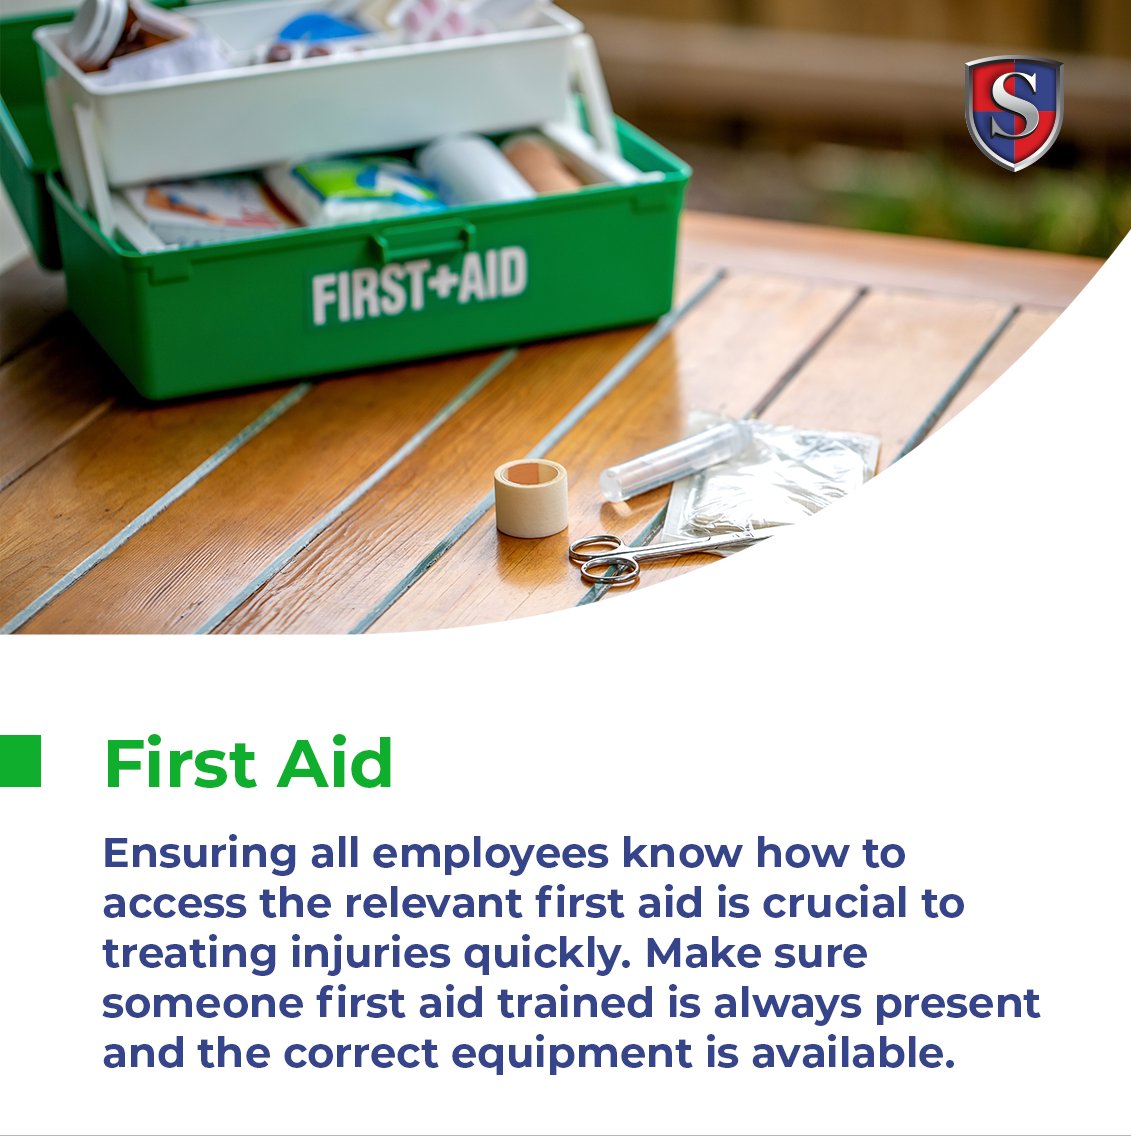 First aid is a crucial first step to minimising the impact of injuries in the workplace. 🩹

Employers must ensure that there is always adequate first aid available to ensure an immediate response if someone is injured at work. ⛑

#HealthandSafety #FirstAid #WorkplaceHealth